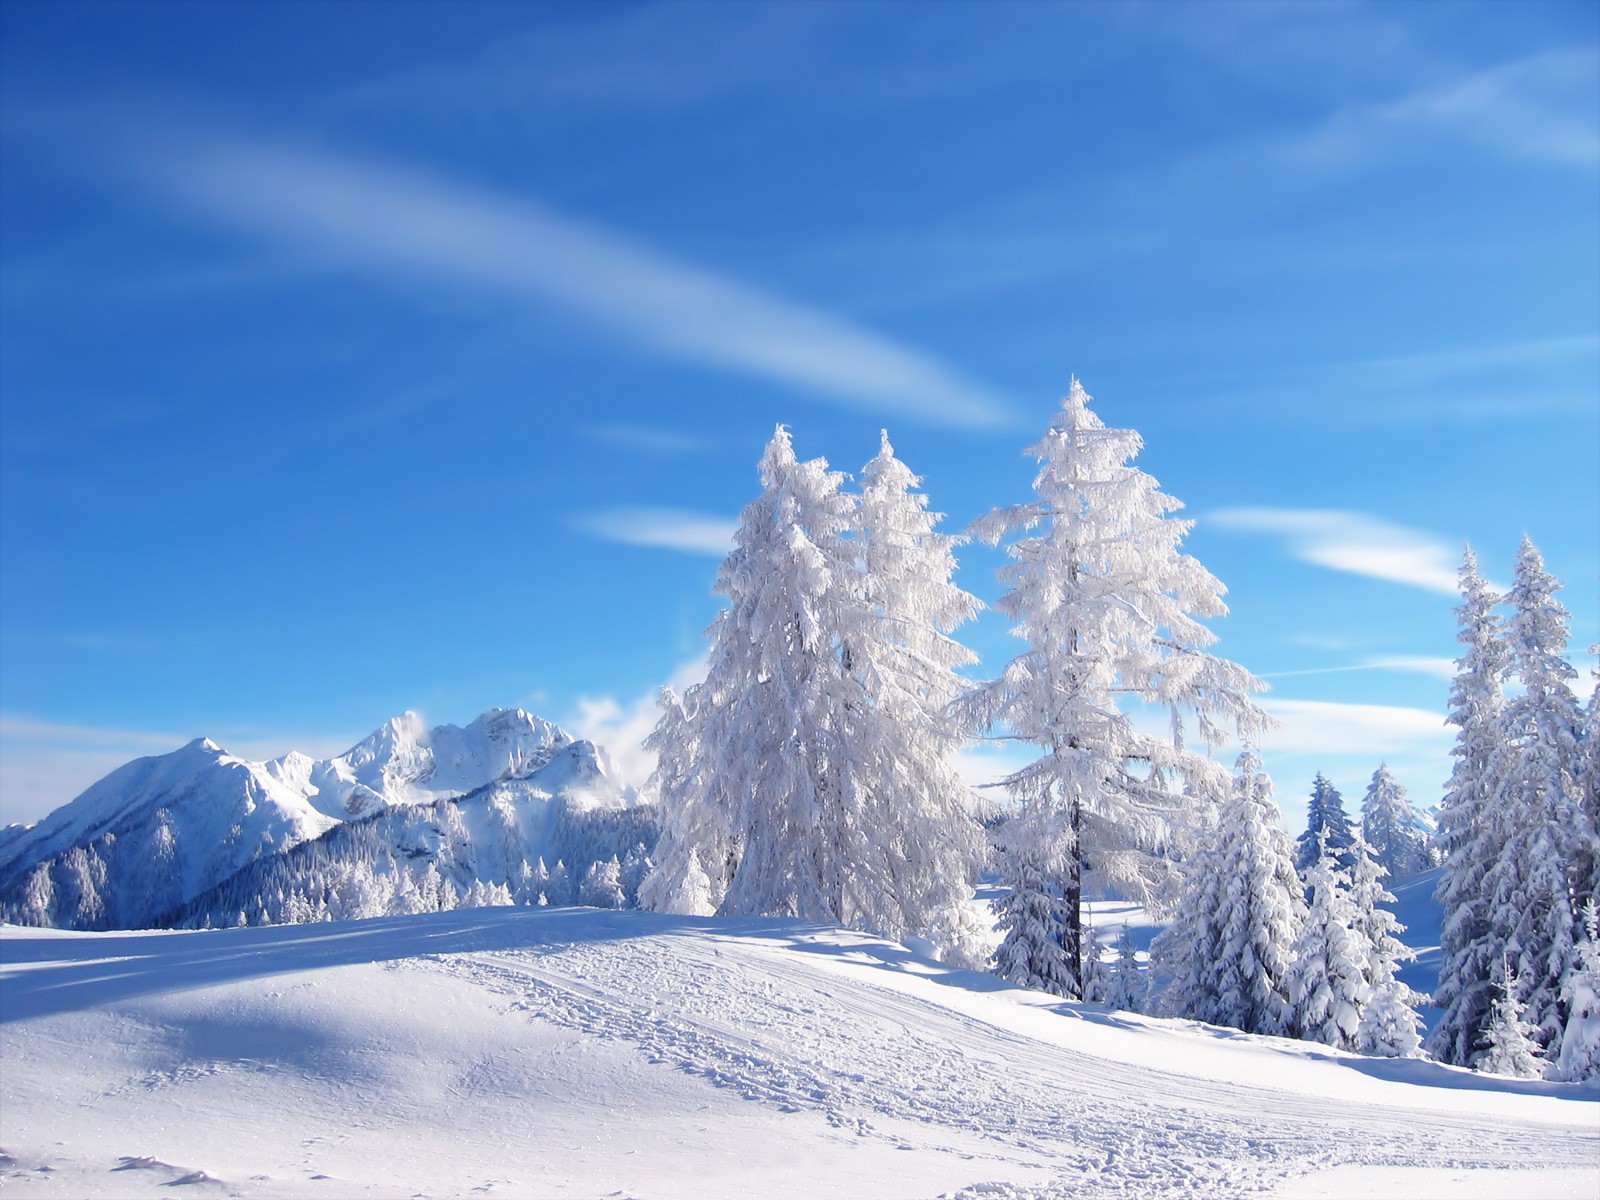 General 1600x1200 landscape trees nature sky mountains sunlight blue clear sky outdoors winter snow